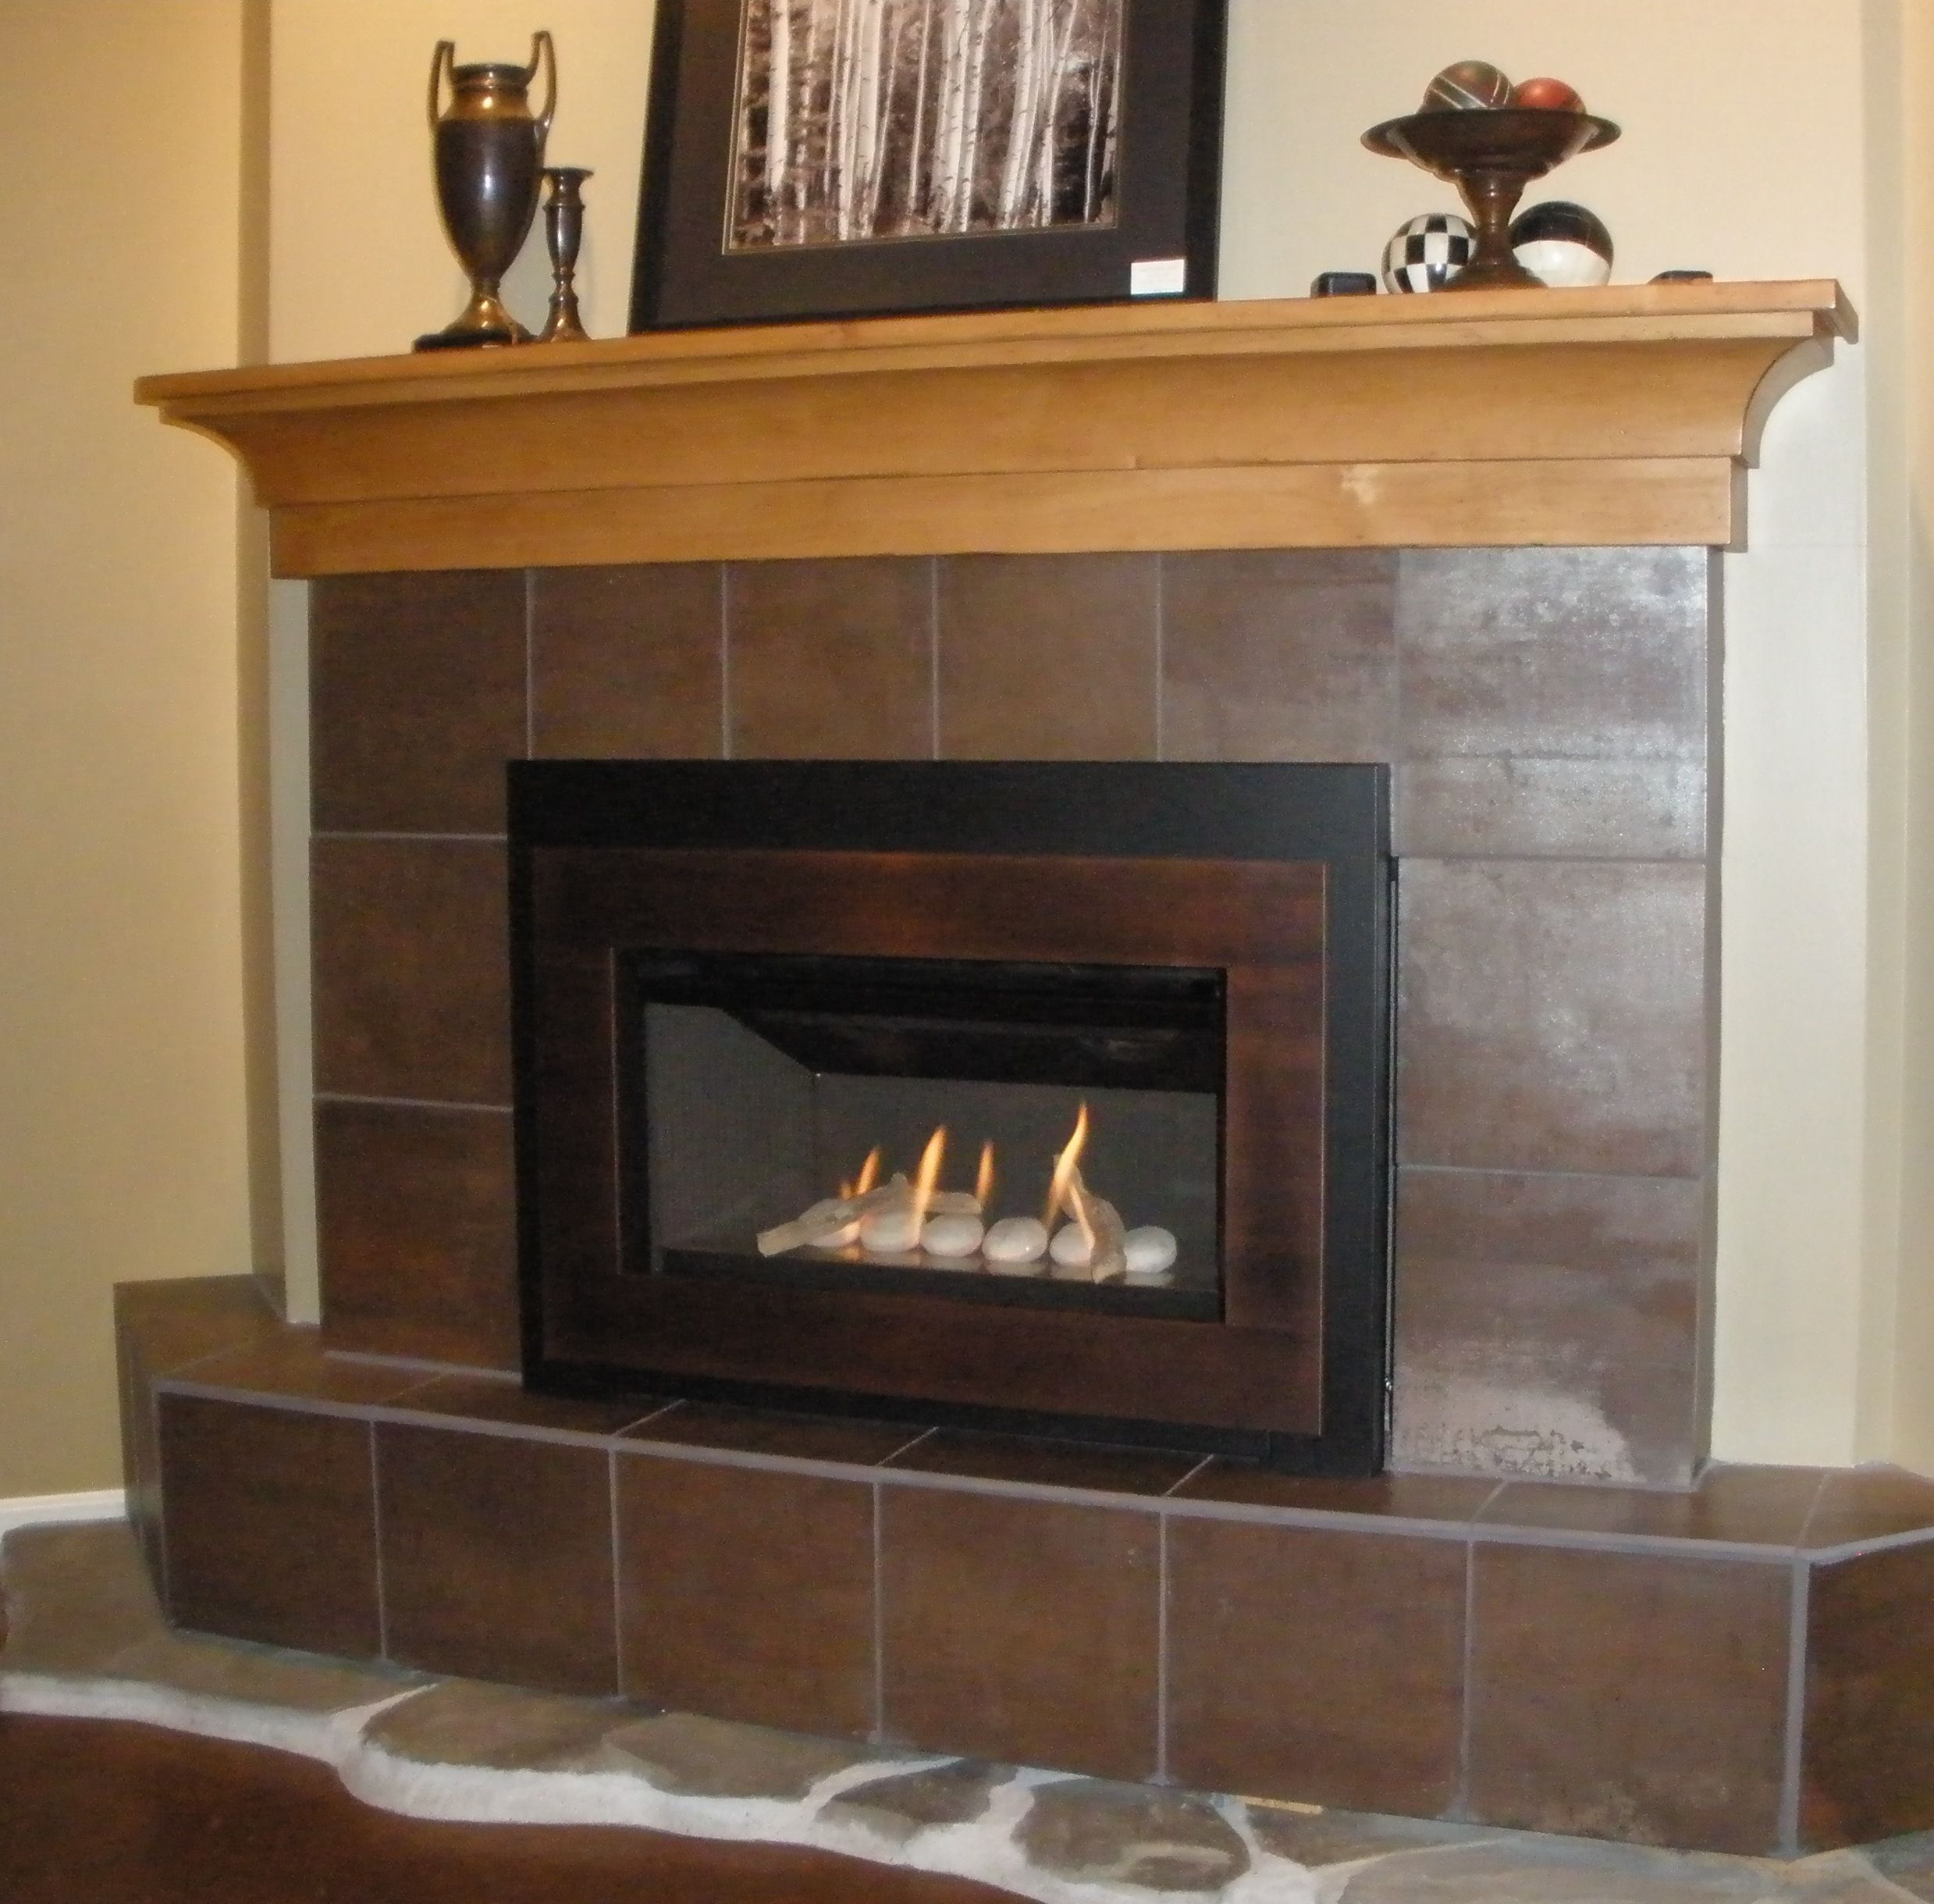 Fireplace Insert Surround Luxury Pin On Valor Radiant Gas Fireplaces Midwest Dealer